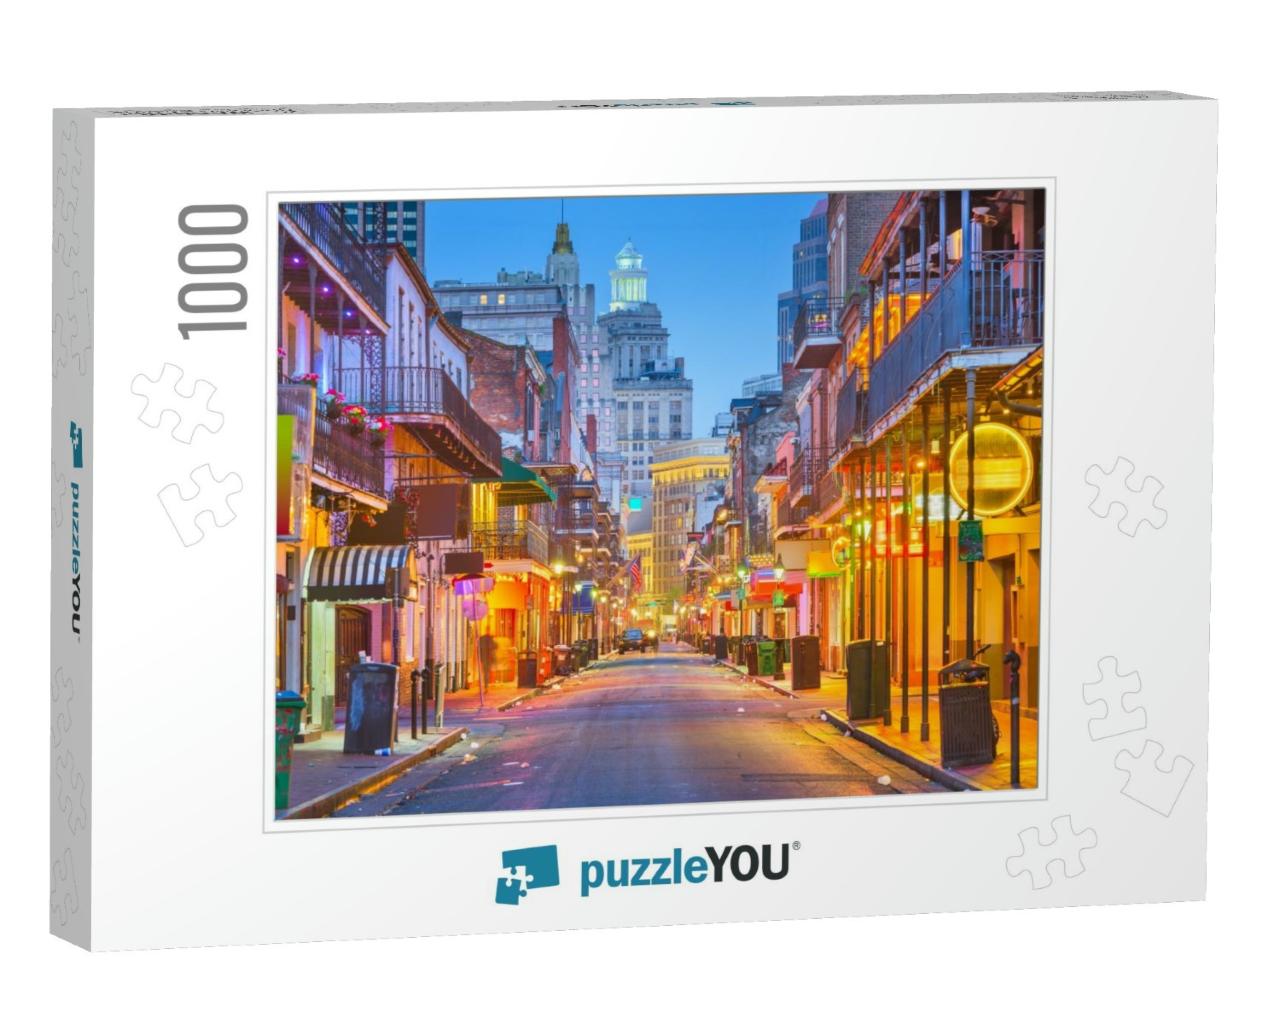 Bourbon St, New Orleans, Louisiana, USA Cityscape of Bars... Jigsaw Puzzle with 1000 pieces